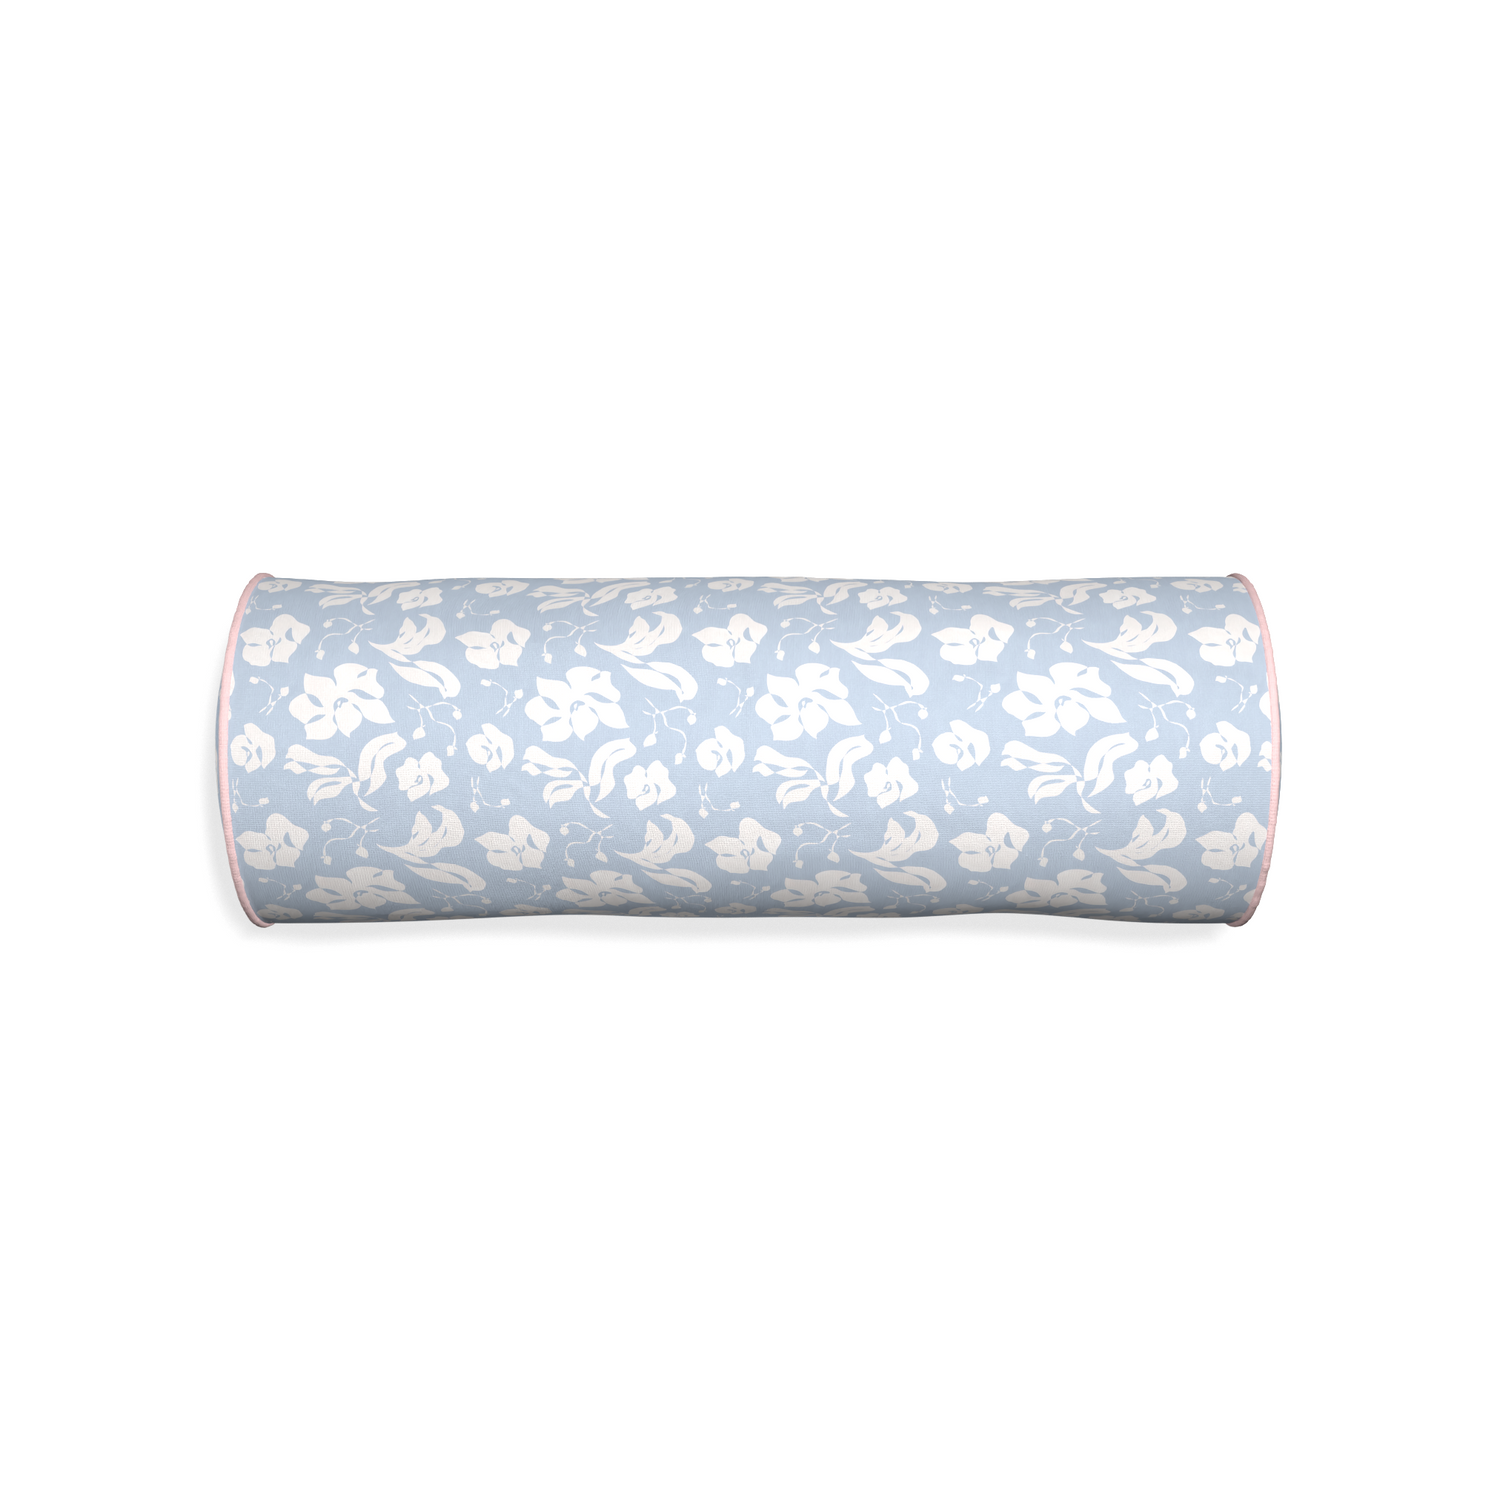 Bolster georgia custom cornflower blue floralpillow with petal piping on white background